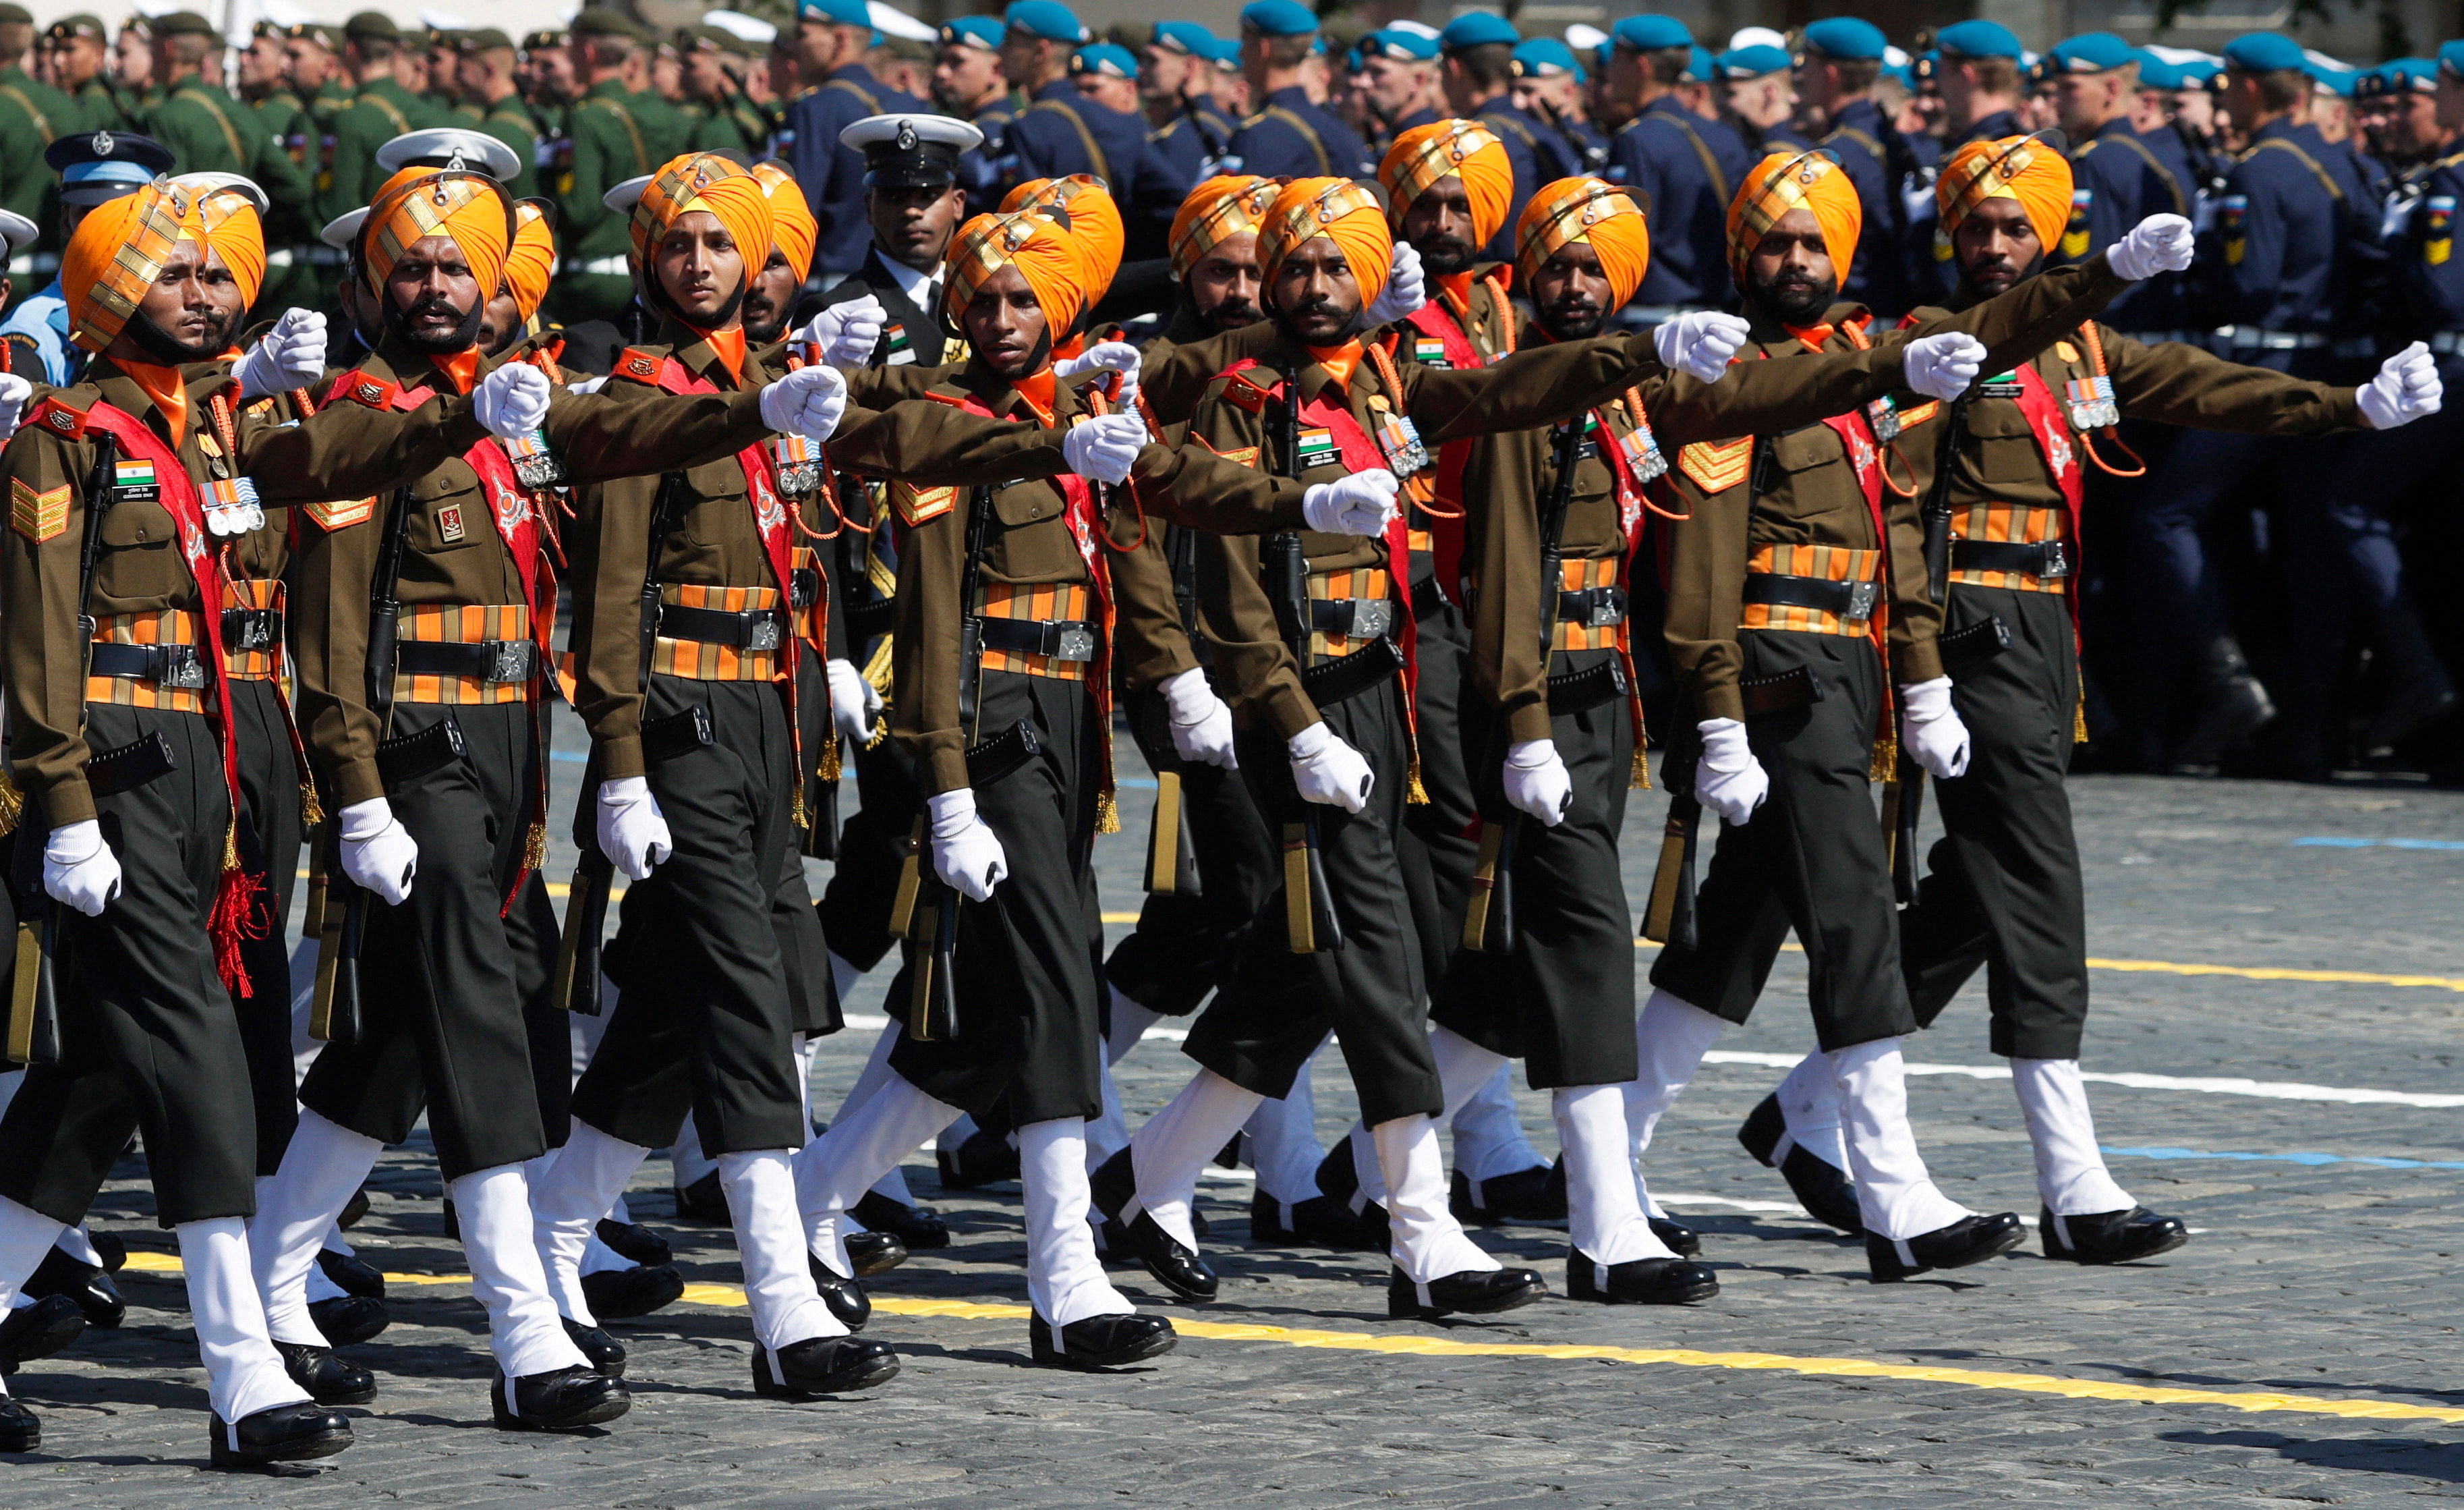 Solders of Indian Armed Forces march in Red Square during the Victory Day military parade marking the 75th anniversary of the Nazi defeat in WWII, in Moscow, Russia, Wednesday, June 24, 2020. The Victory Day parade normally is held on May 9, the nation's most important secular holiday, but this year it was postponed due to the coronavirus pandemic. Credit: AP/PTI Photo